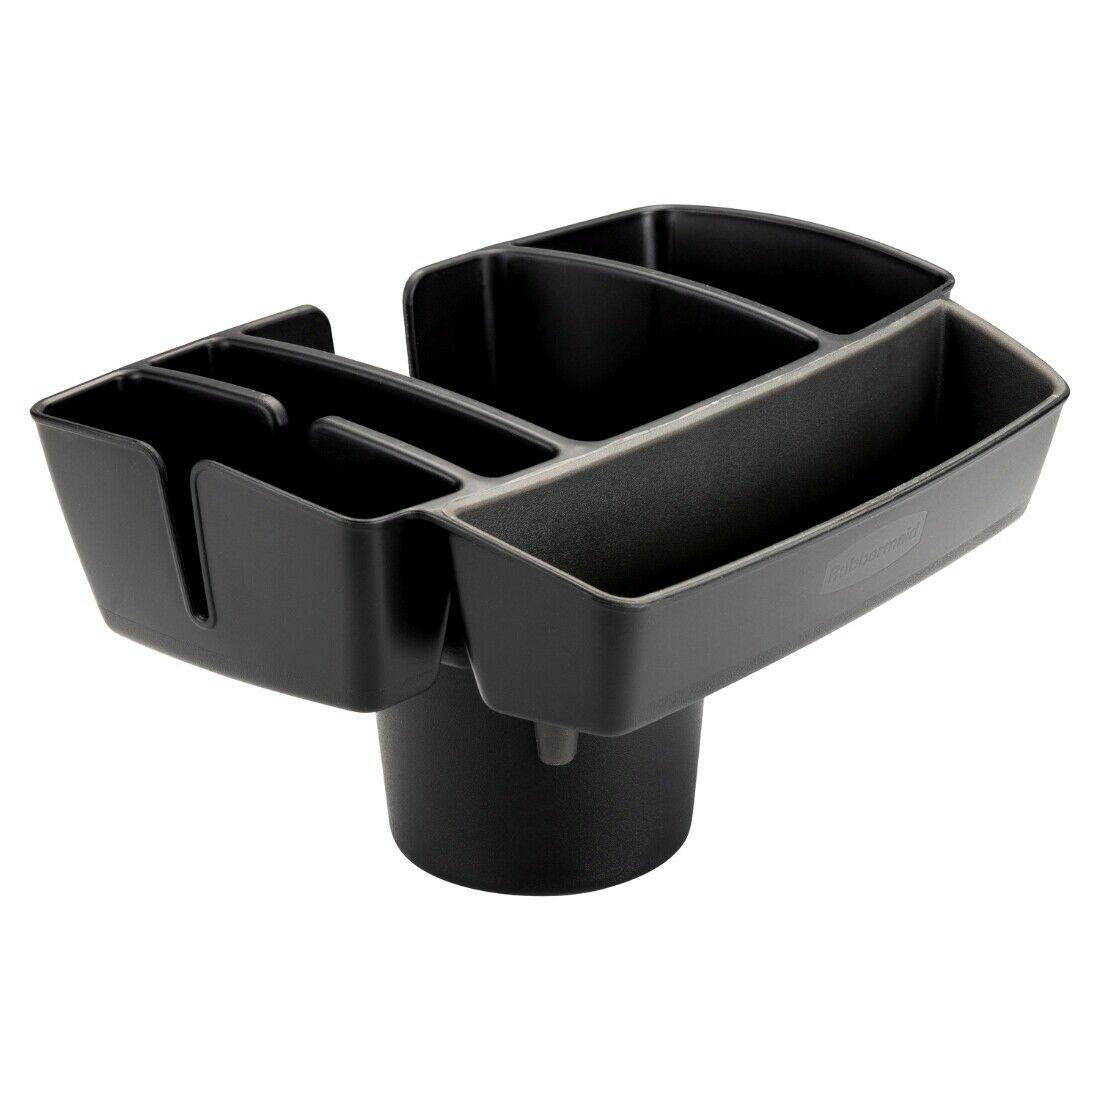 Rubbermaid Back Seat Food Tray Car Interior Organization Convenient Sturdy  Large Tray With Cup Holders - Walmart.com | Back seat, Rubbermaid, Car  interior organization